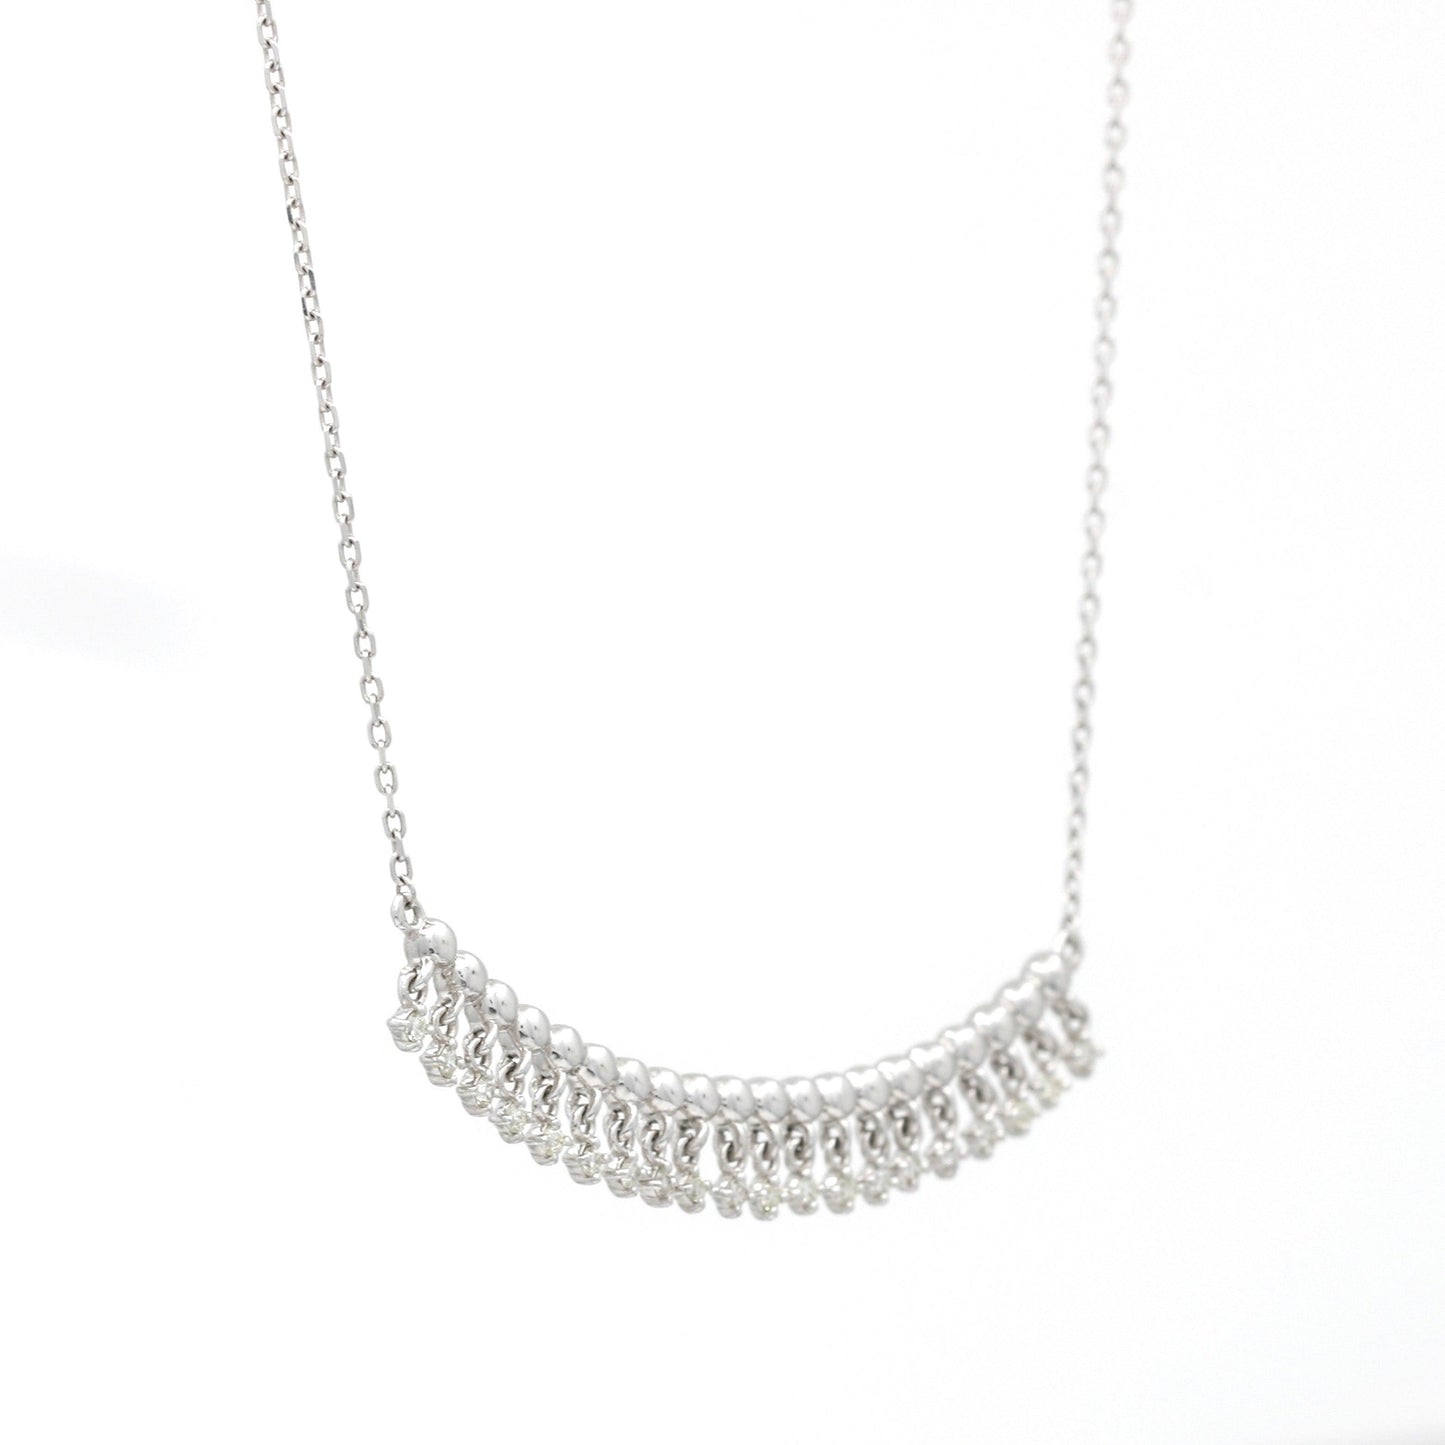 Women's Cable Smile Bar with Dangling Diamonds Necklace in 14k White Gold - 31 Jewels Inc.